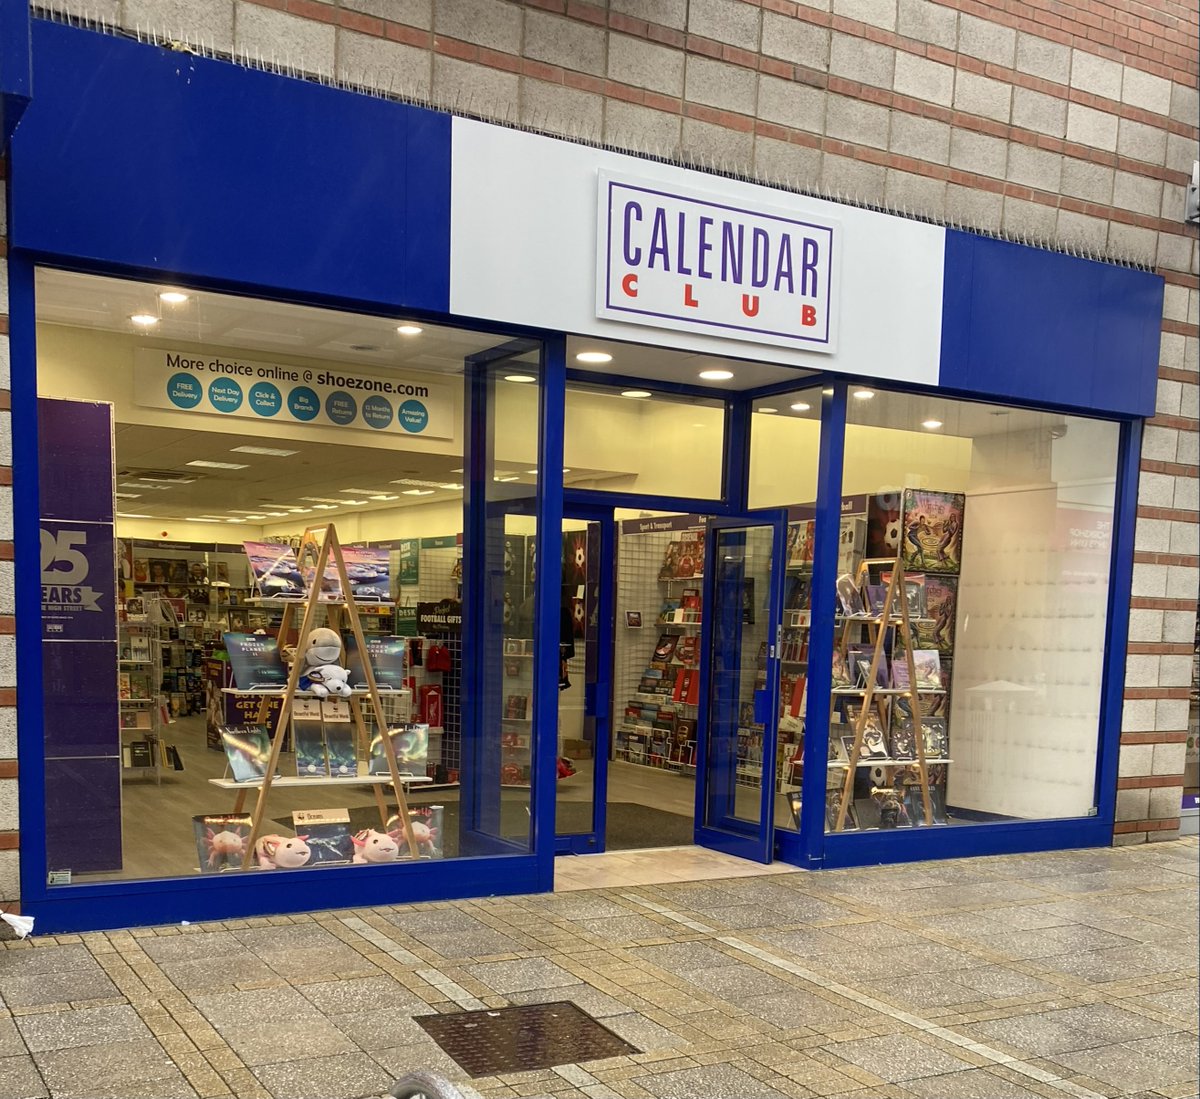 Calendar Club is back in town! Shop 1000+ products instore or choose from their extended range of 6500+ items, available through their order instore service. Their range includes calendars, stationery & much more. Find them opposite the old Wilko unit on New Conduit Street.